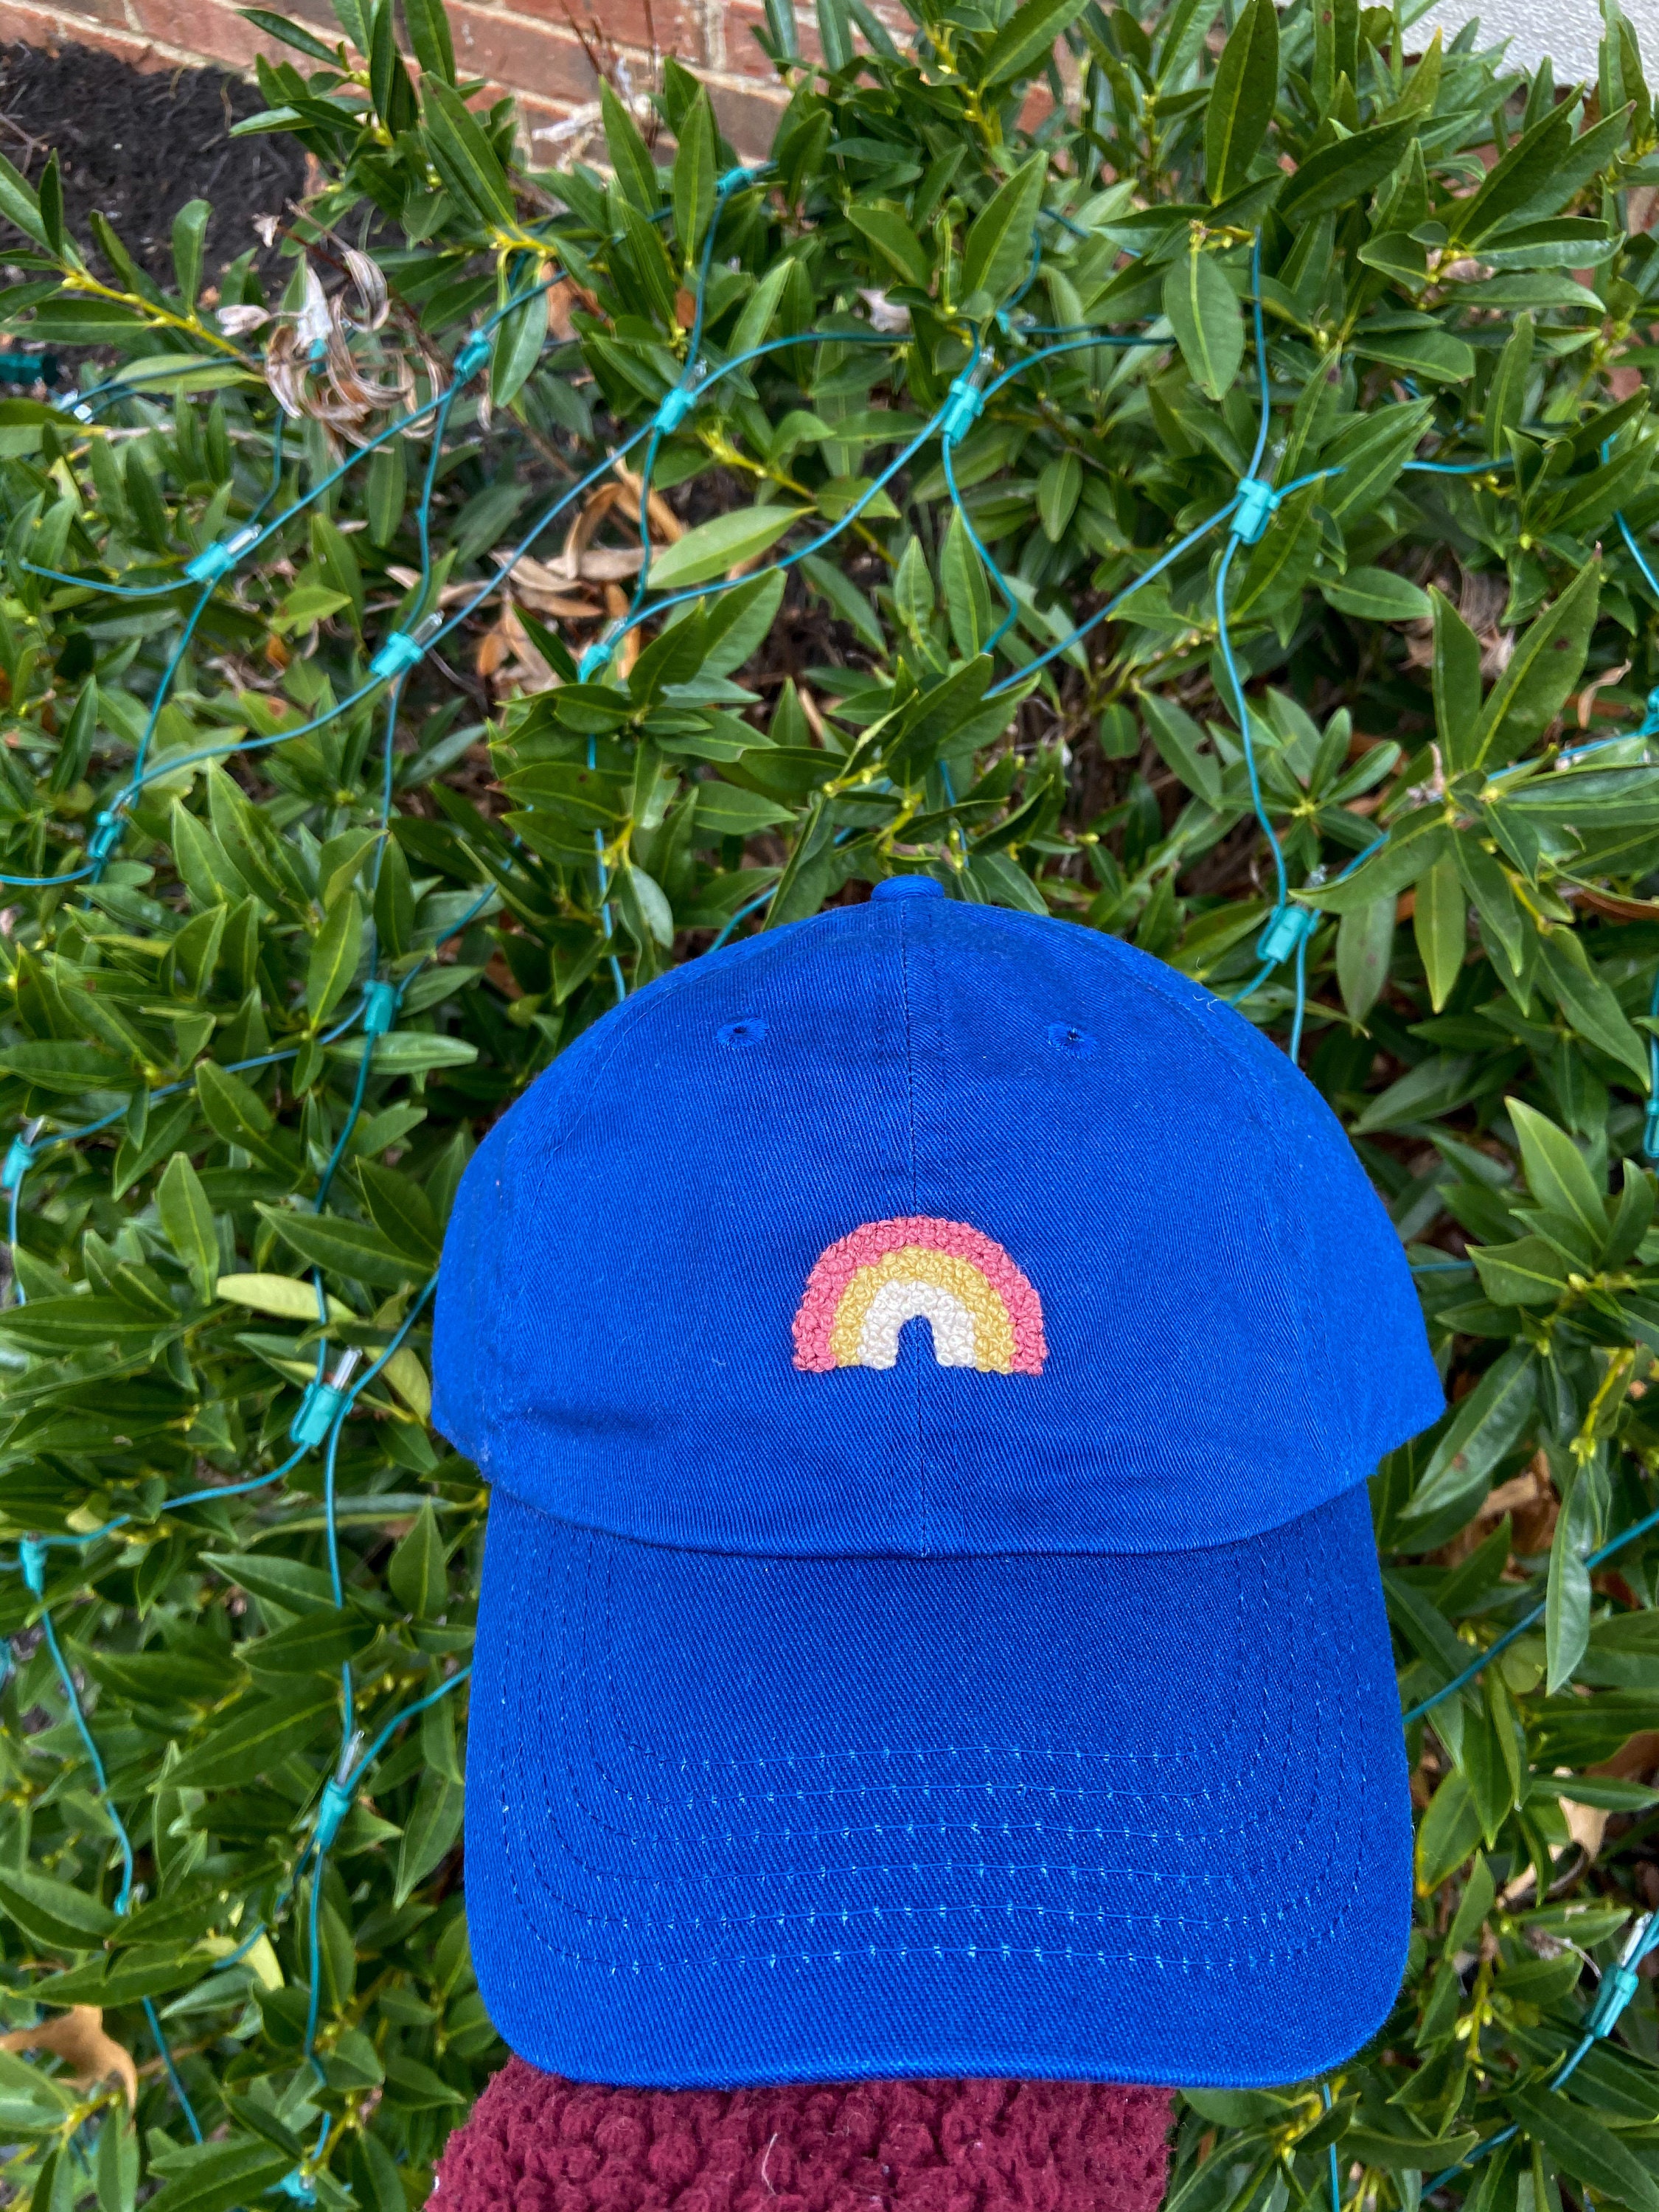 Hand Embroidered Rainbow Hat | Etsy